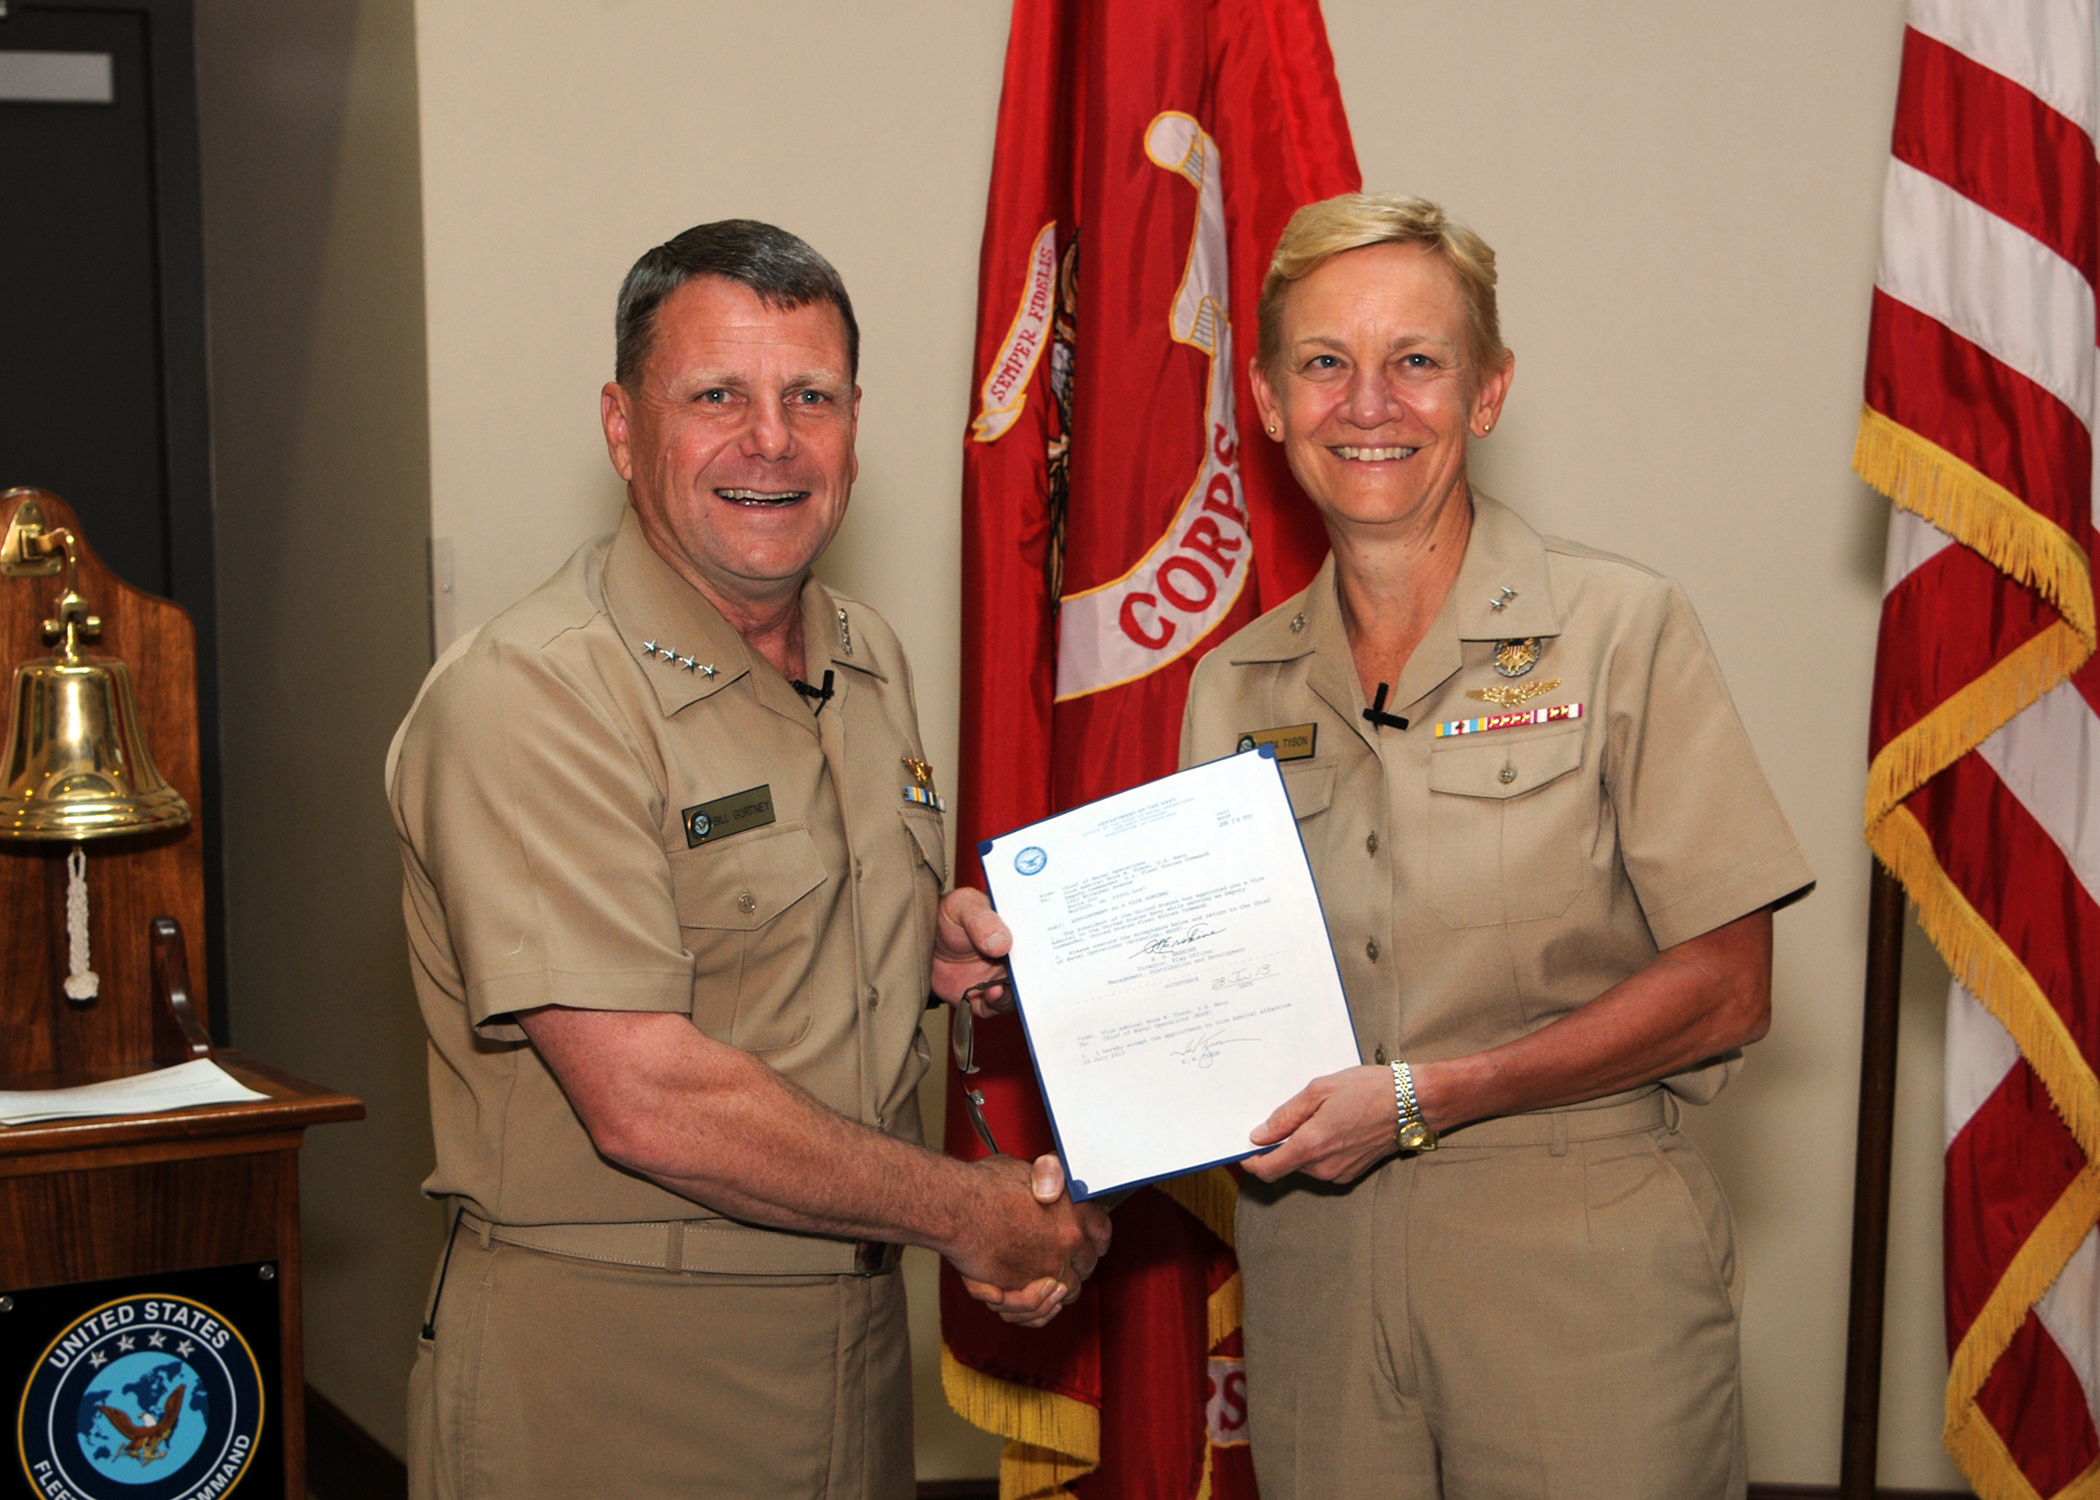 Vice Adm. Nora W. Tyson (right) and Adm. Bill Gortney, commander U.S. Fleet Forces (USFF) hold a letter authorizing her to put on a third star during a promotion ceremony in 2013. US Navy Photo